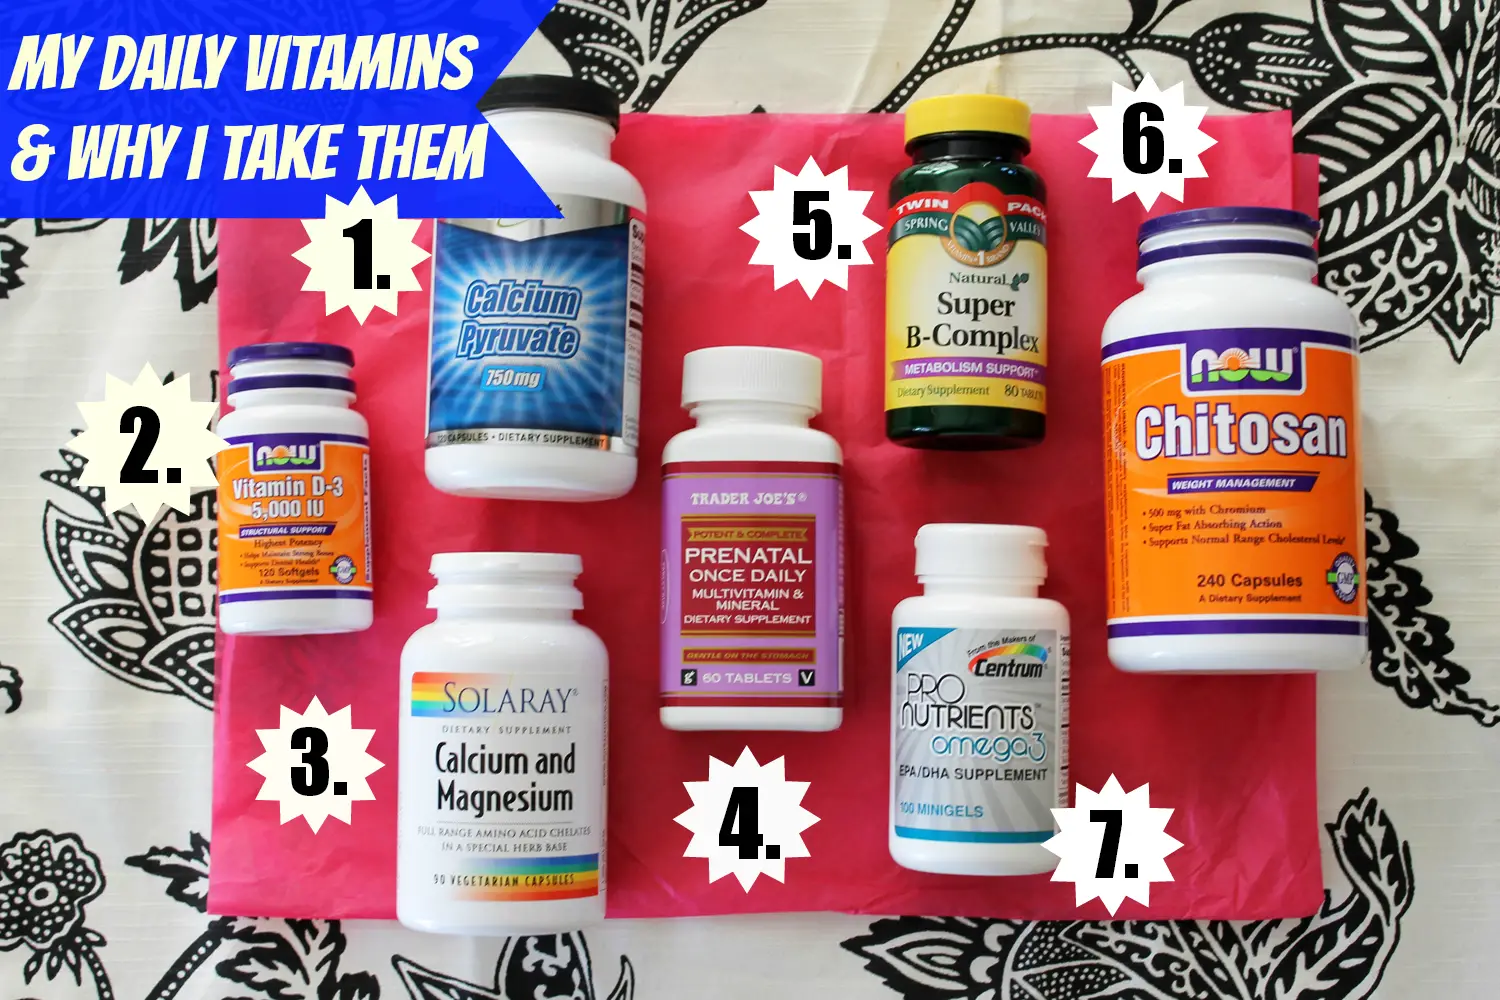 There are so many vitamins and supplements out there to ...